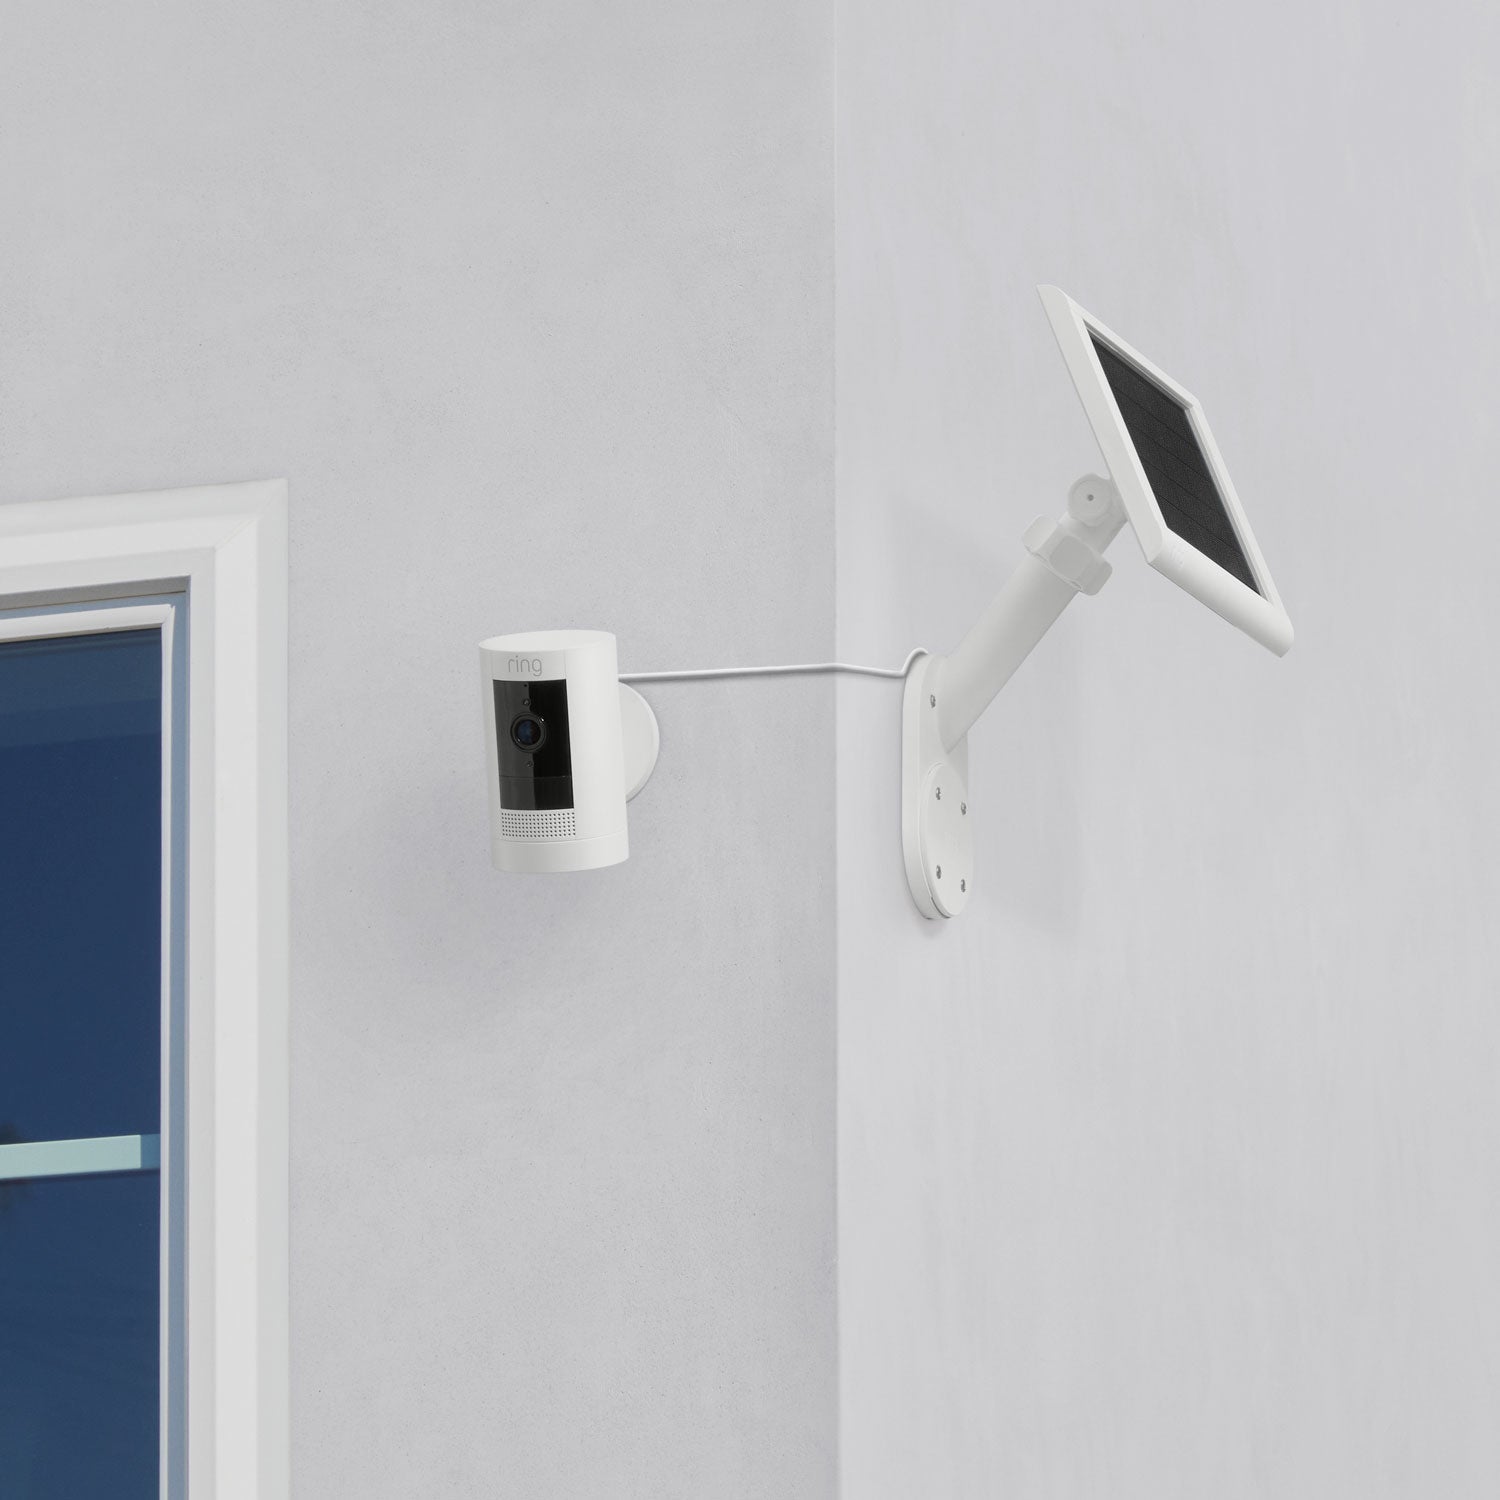 Wall Mount for Solar Panels and Cams - Installed on corner of home, Wall Mount for Solar Panels and Cams in white on one wall and detached Stick Up Cam on other wall.